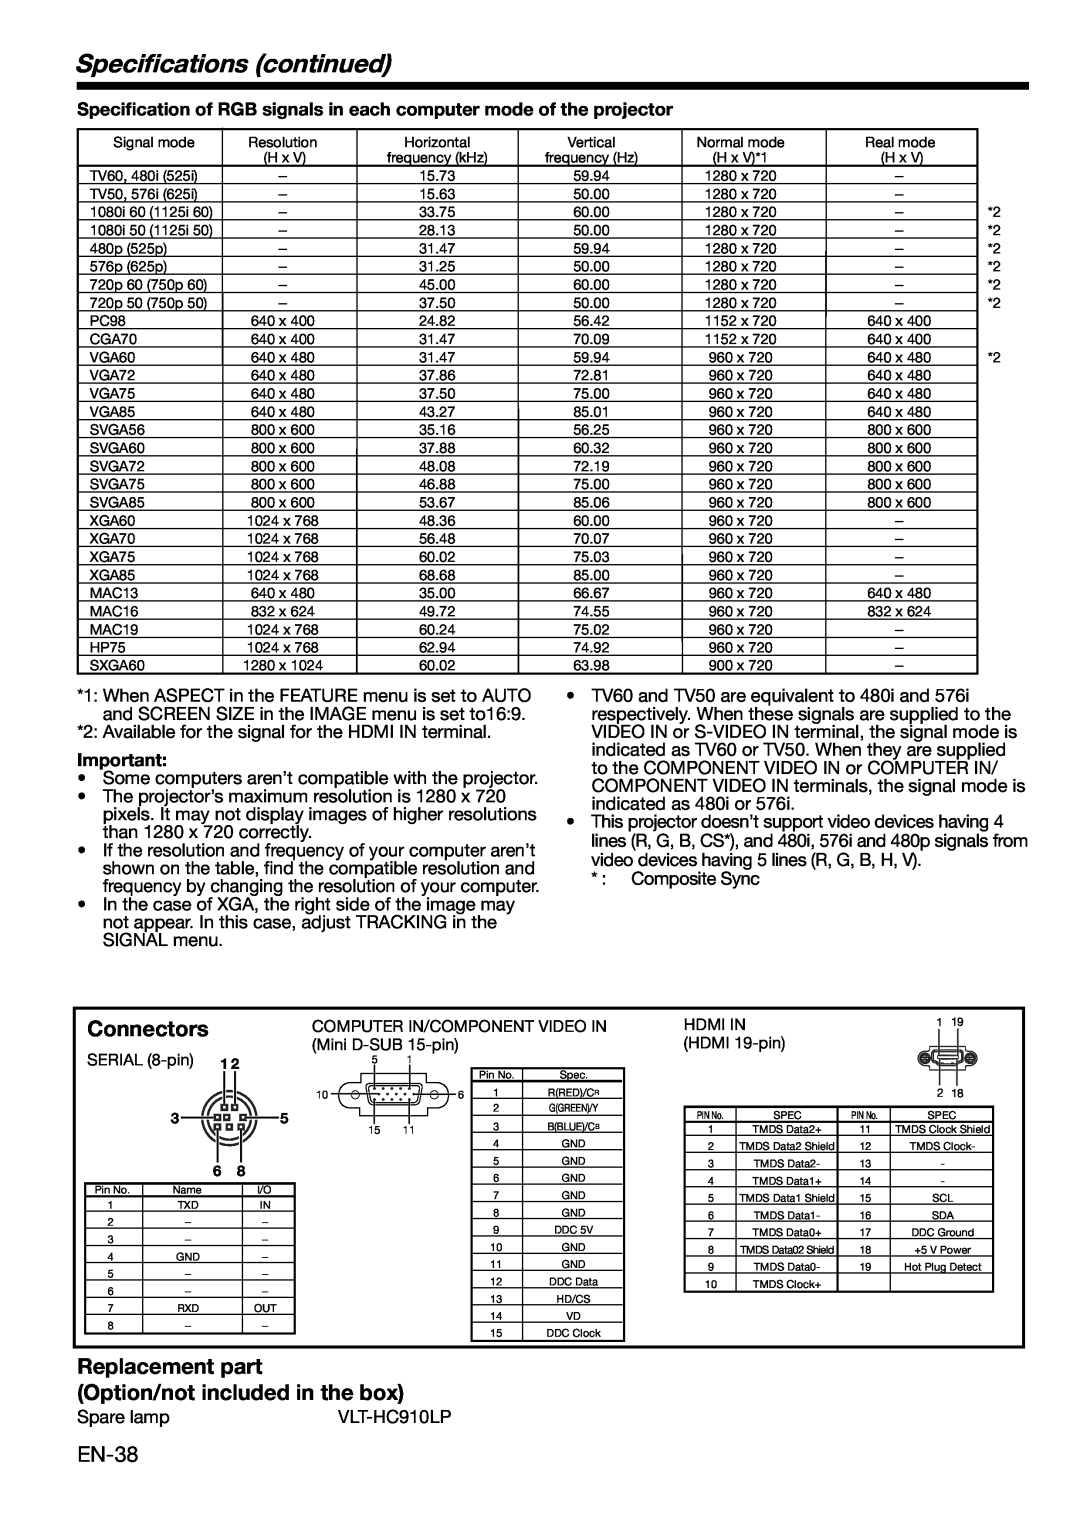 Mitsubishi HC1100 user manual Speciﬁcations continued, Connectors, Replacement part Option/not included in the box 